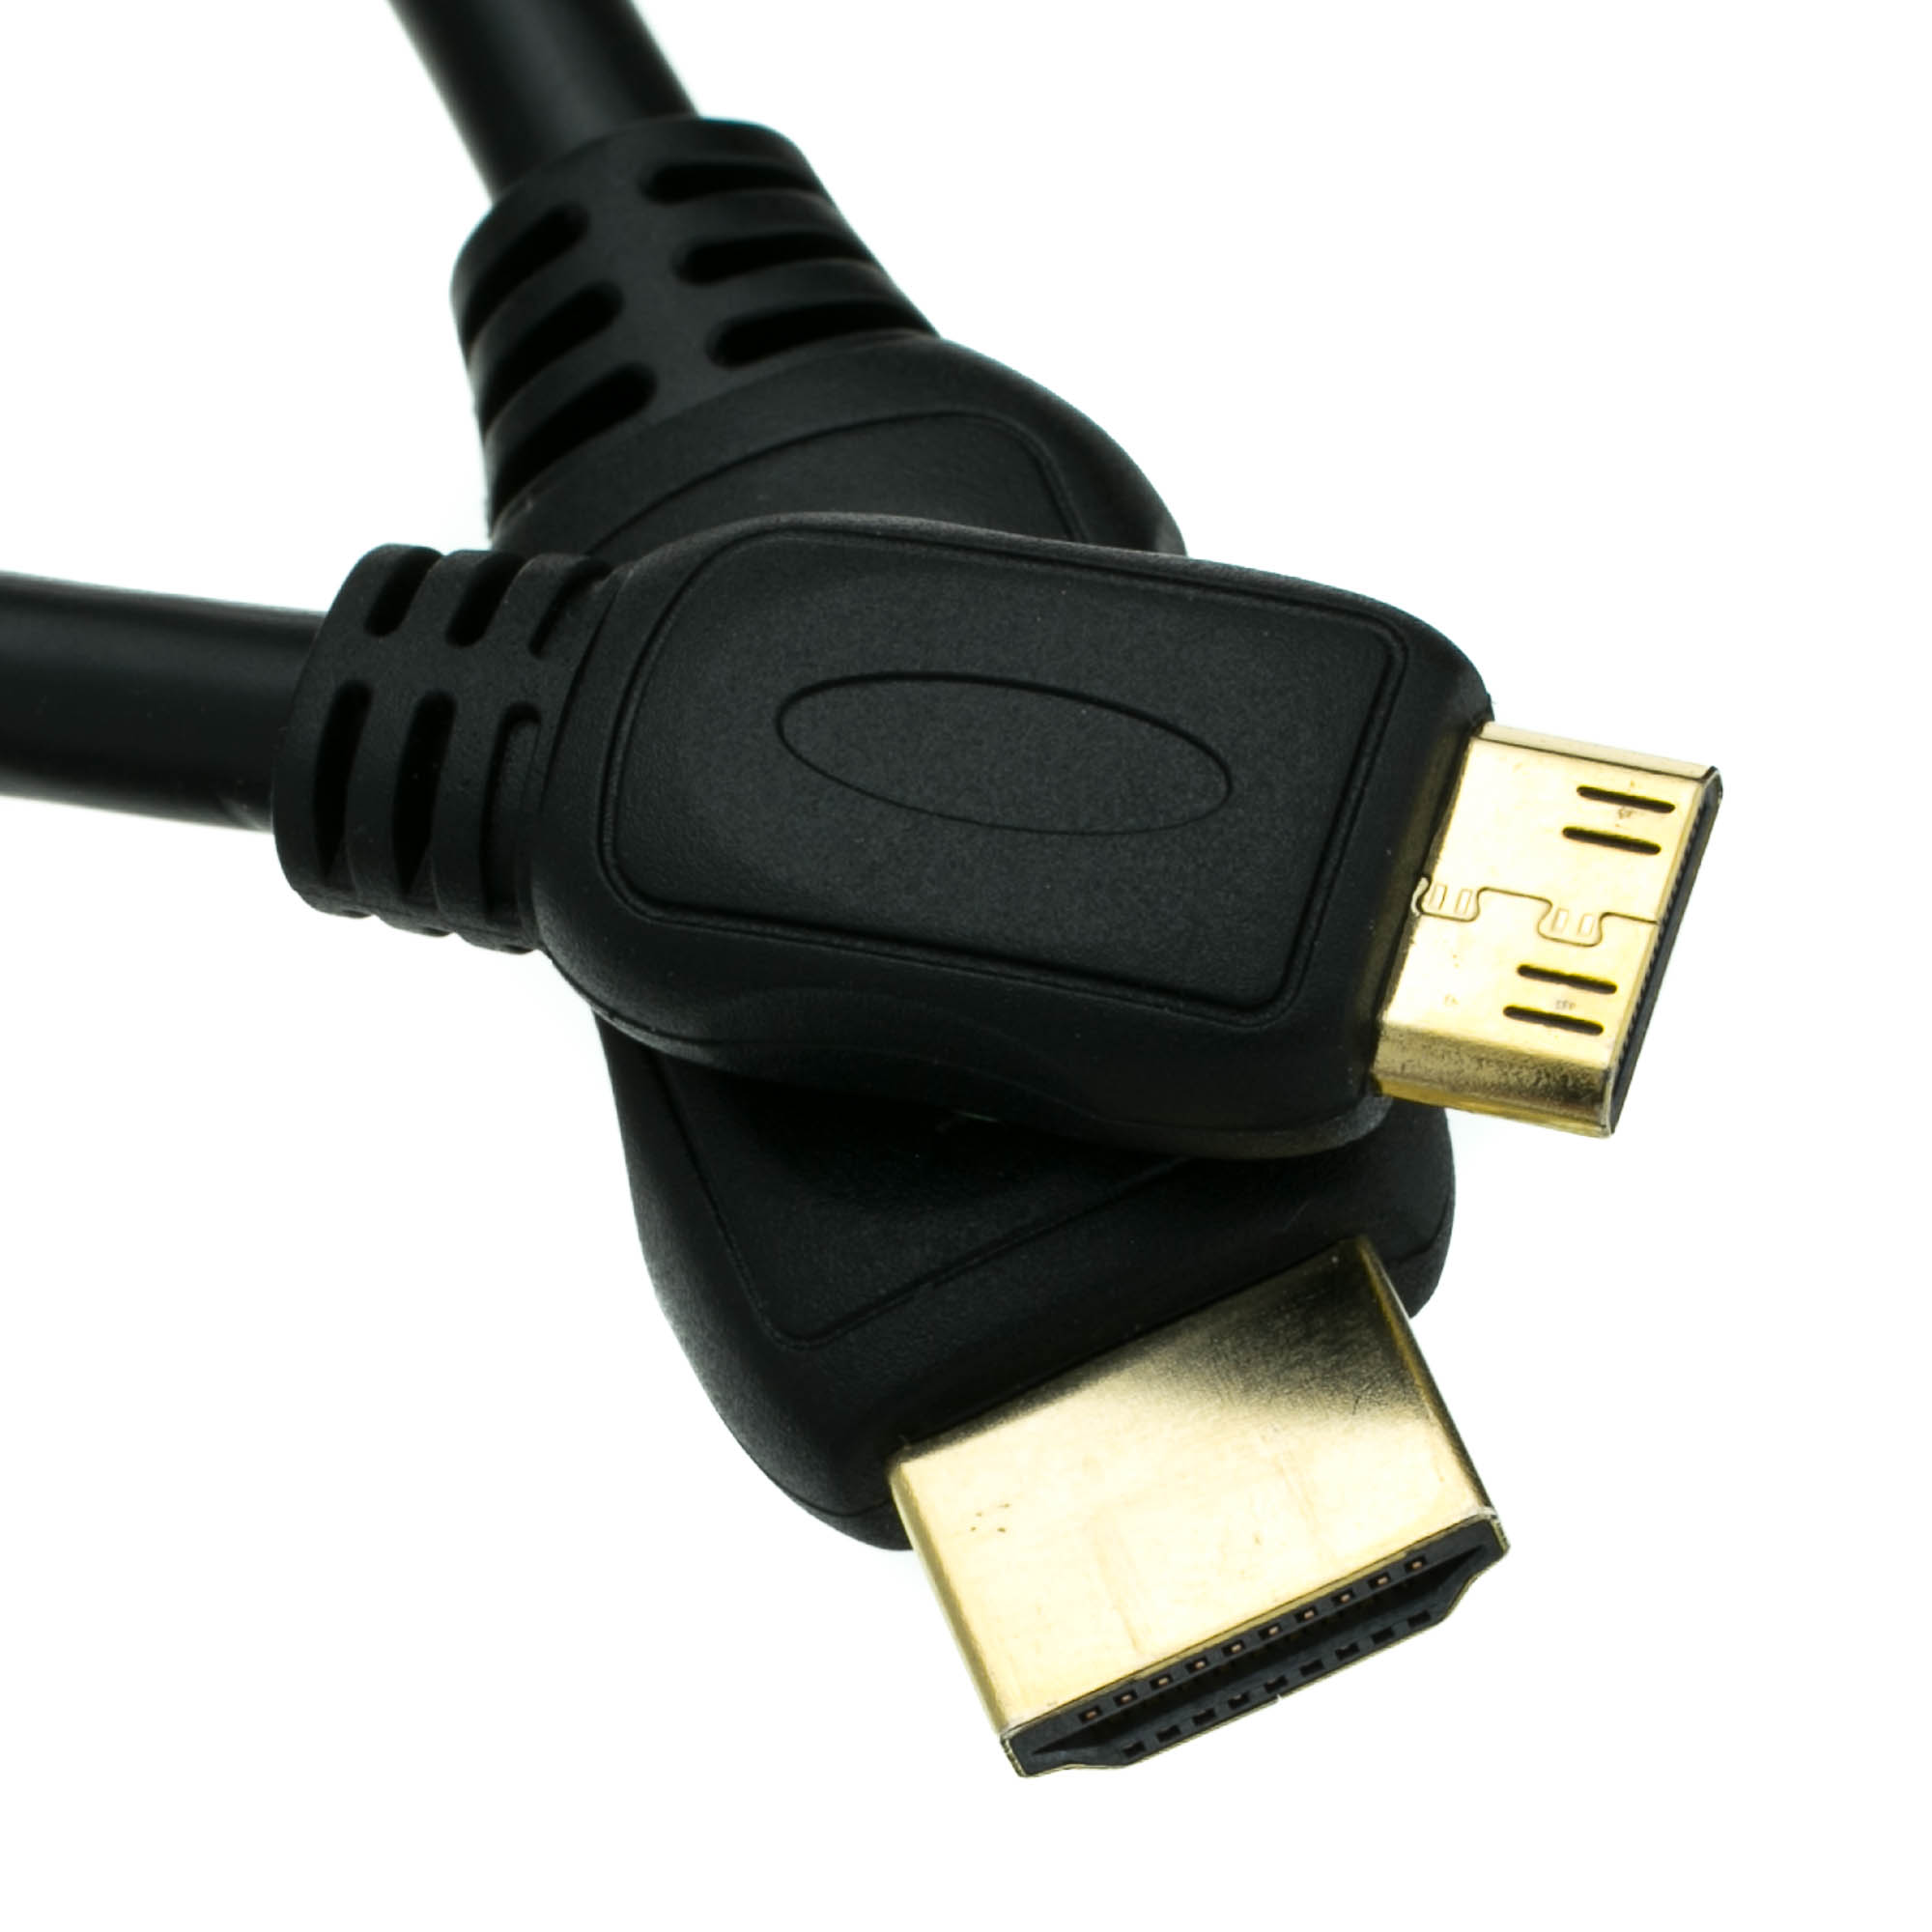 HDMI to Mini HDMI Connector Cable - 15 ft.